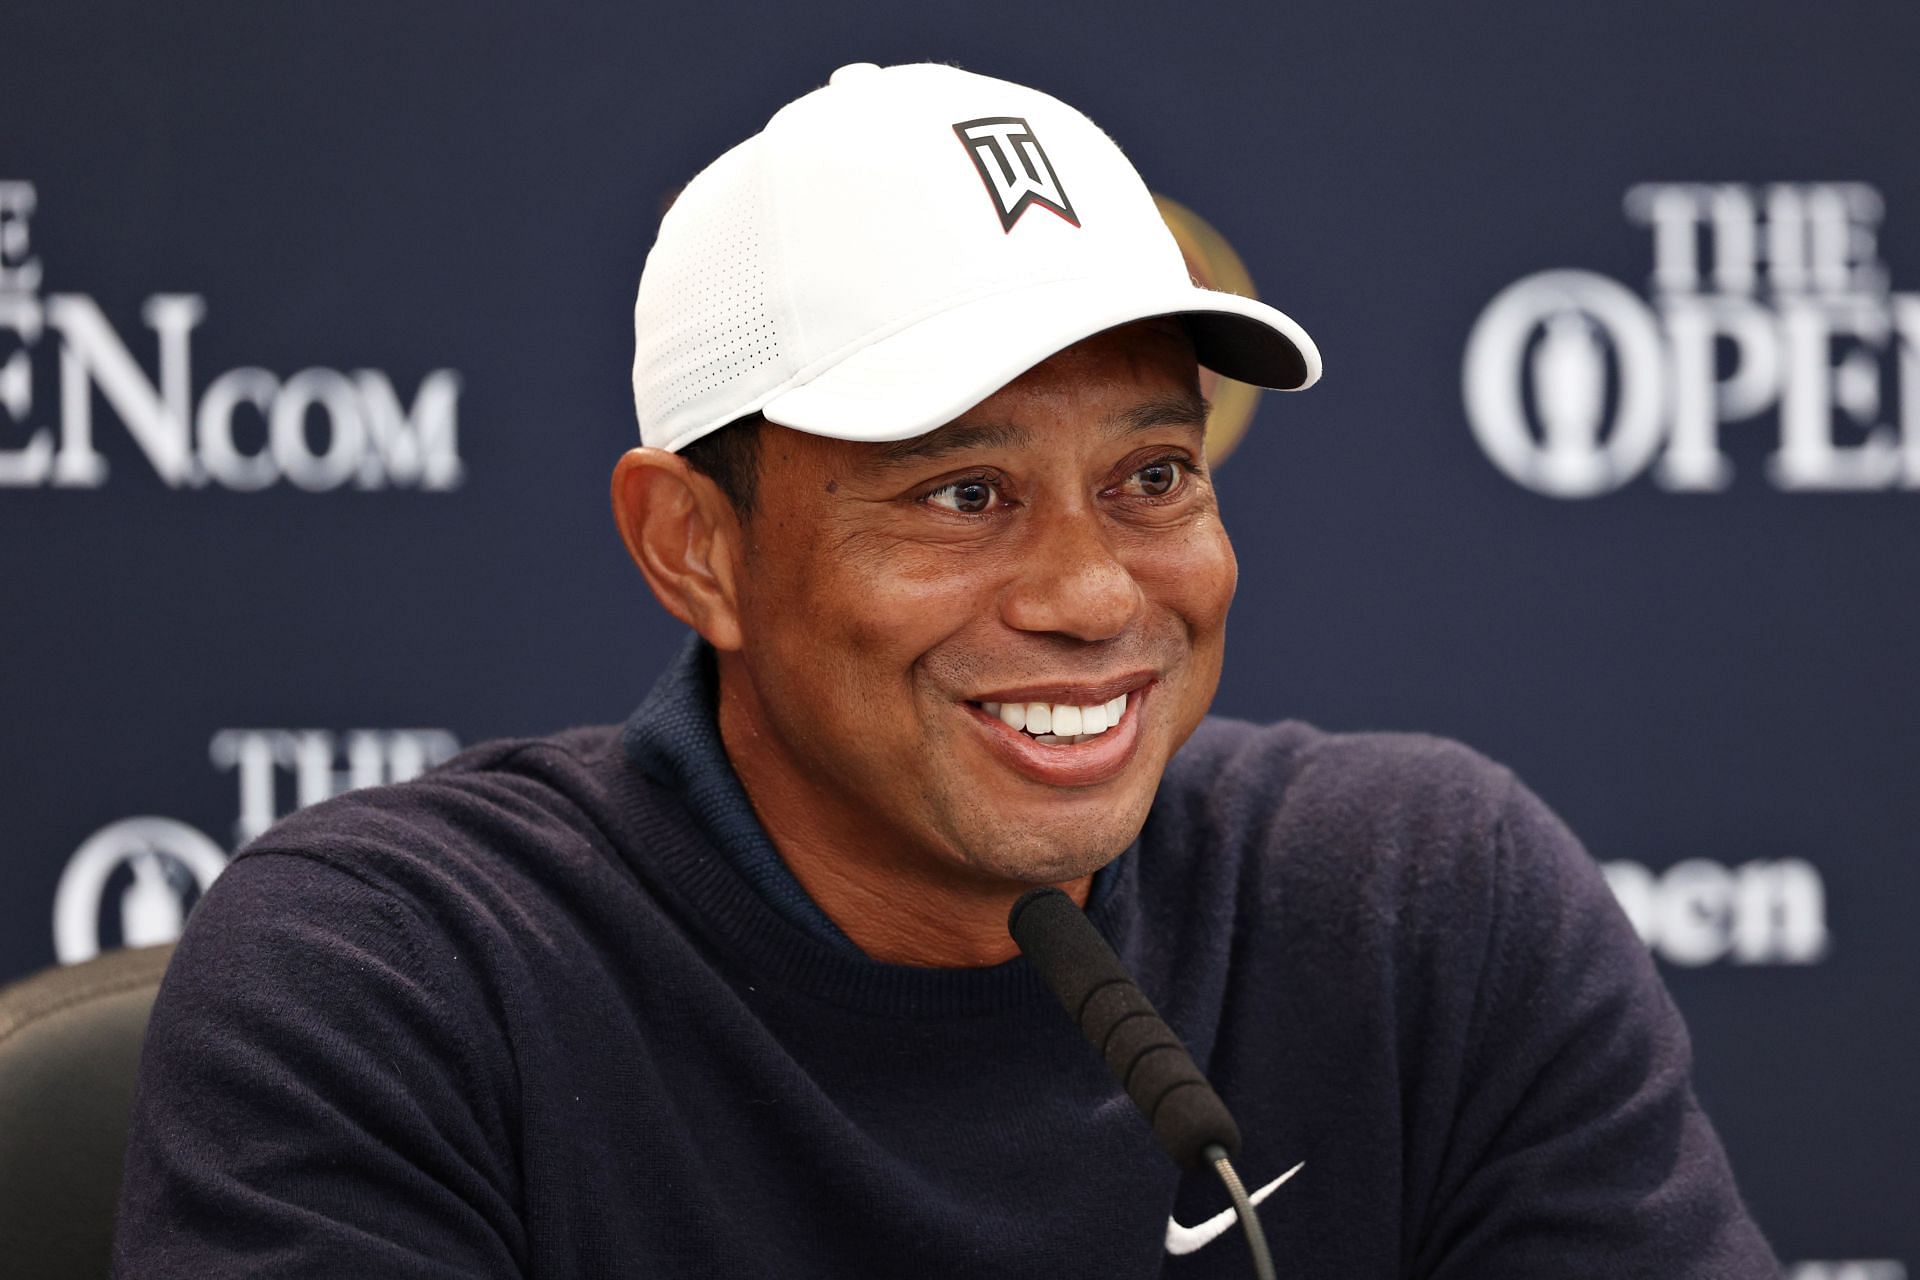 Tiger Woods at 150th Open - Previews (Image via Getty)